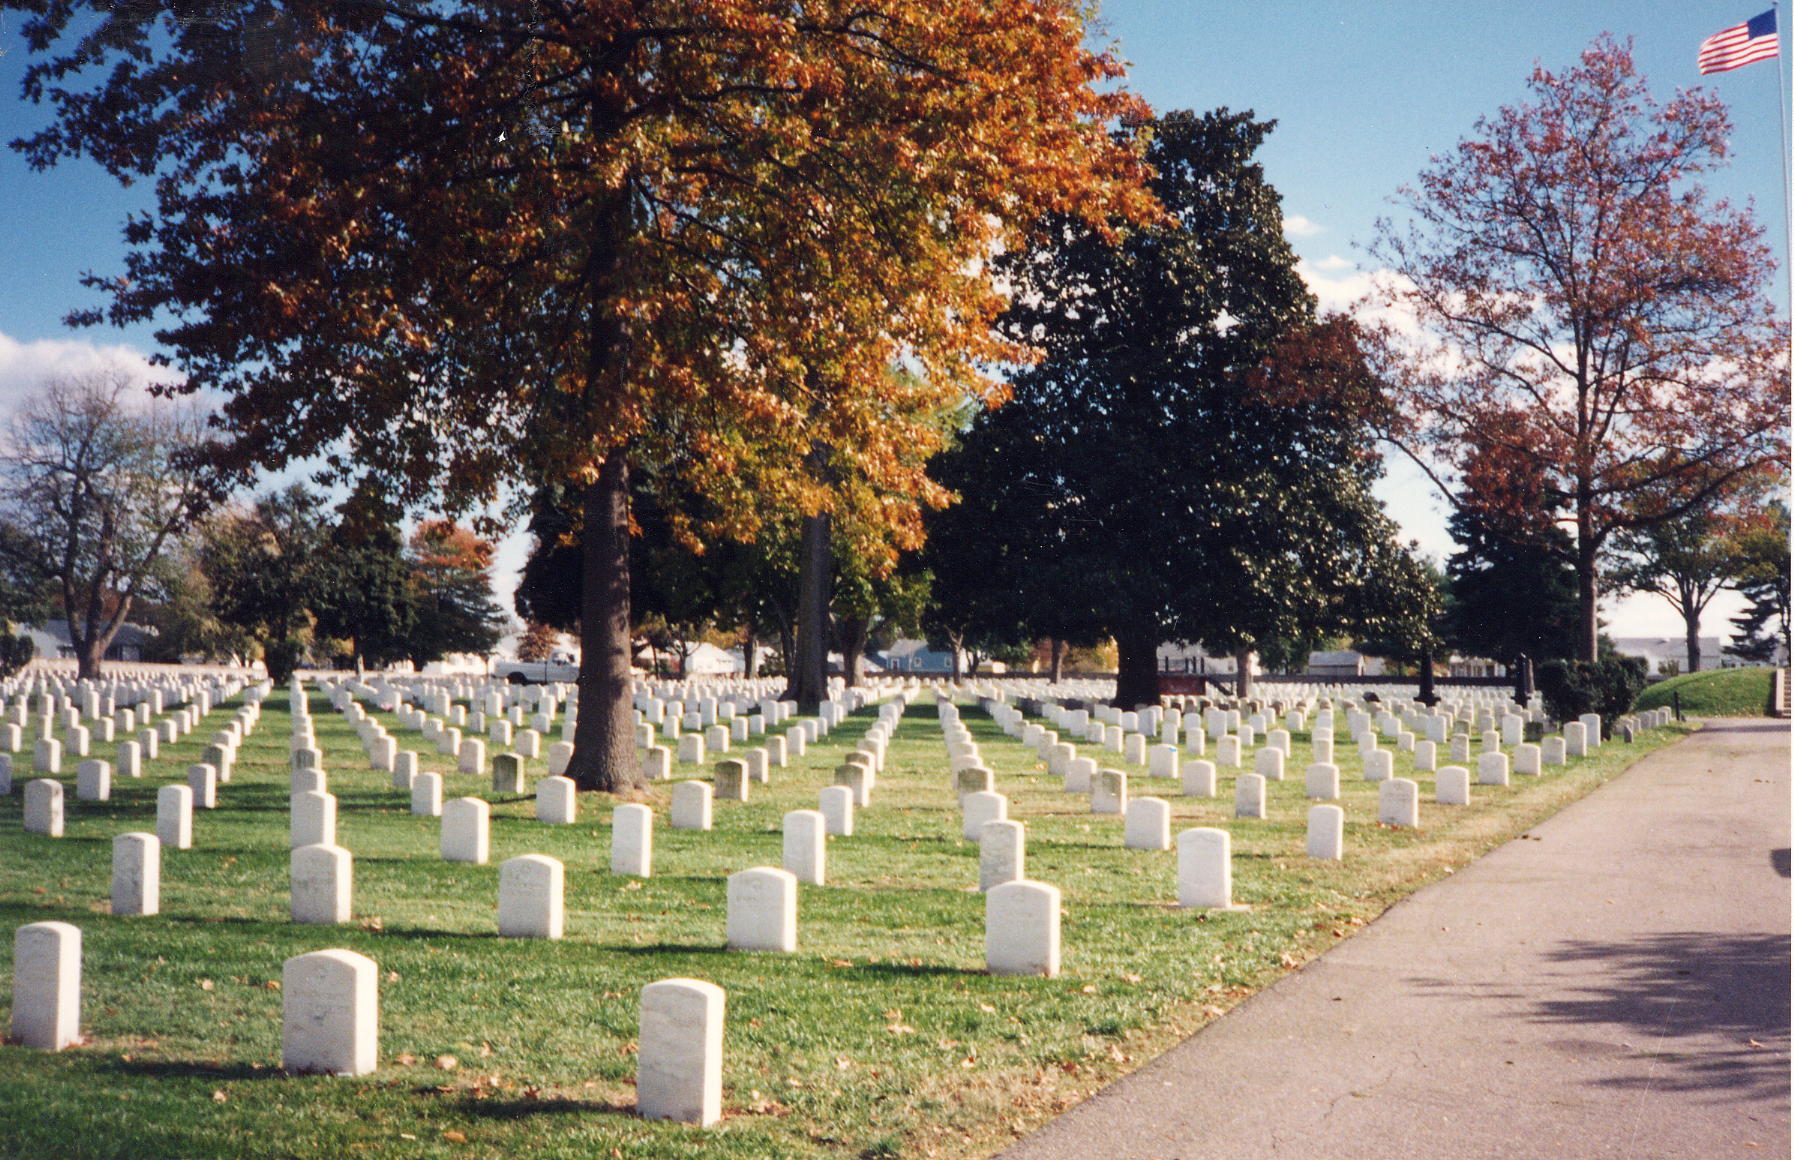 Photo of vertical rows of upright markers with several large trees sprinkled throughout the grounds.